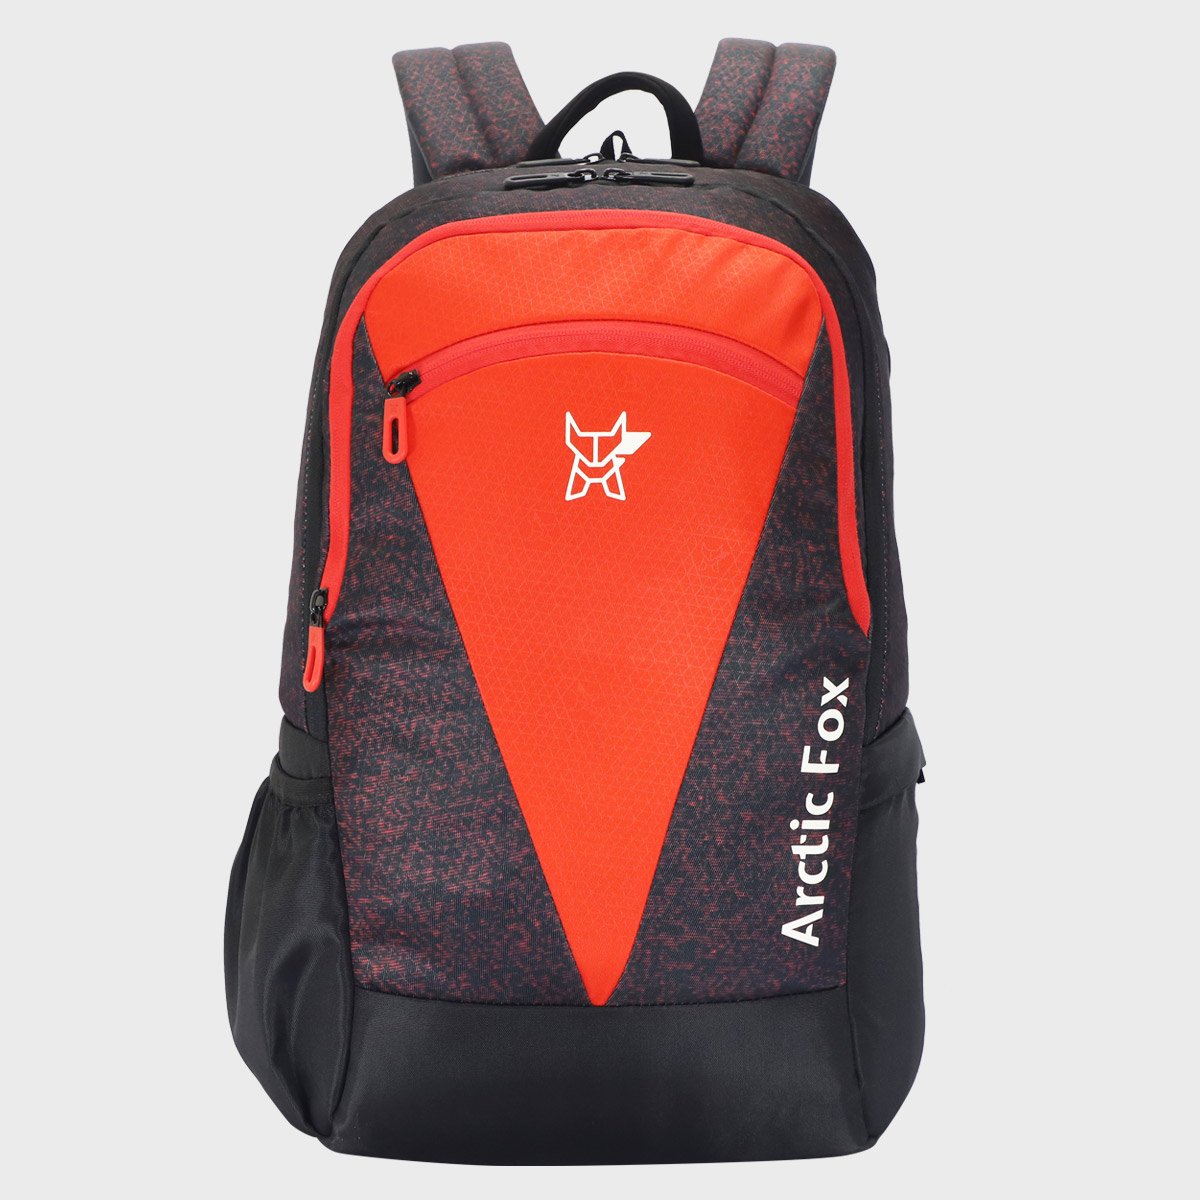 Arctic Fox Glitch Fiery Red 36 Ltr Everyday  School  Bag and Hiking Backpack with Poncho Rain Jacket